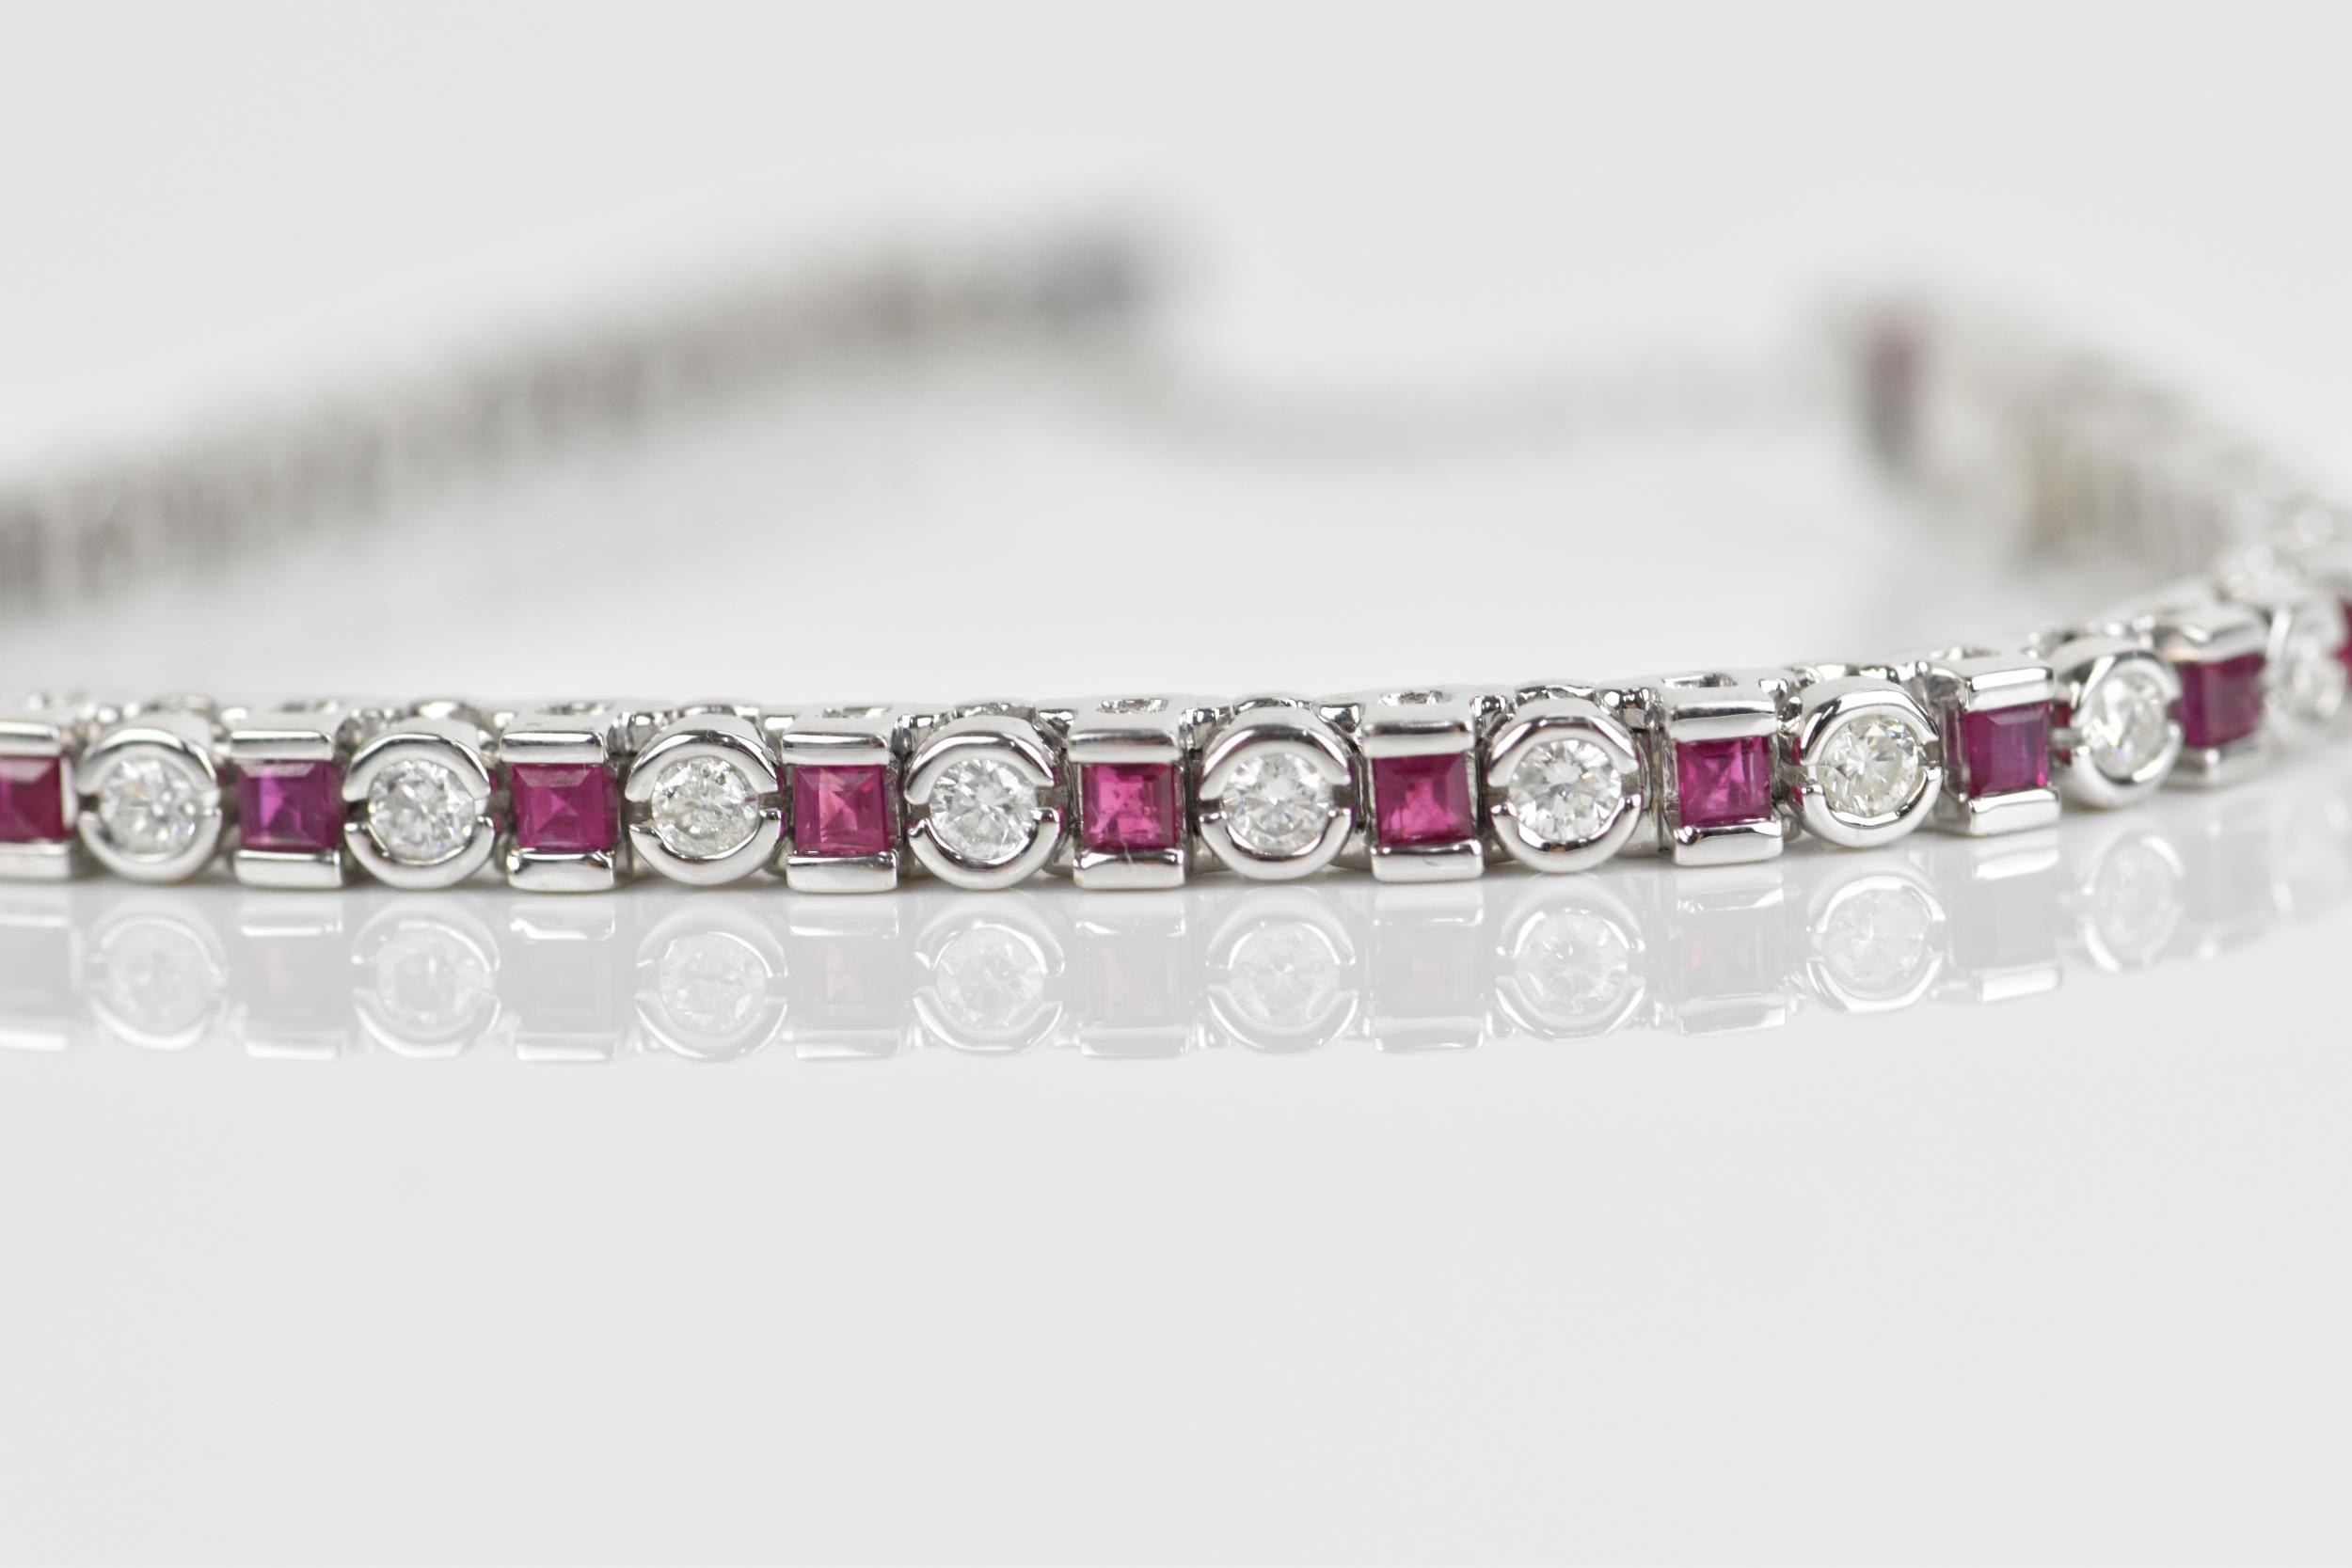 An 18ct white gold, diamond and ruby bracelet, with alternating round brilliant cut diamond and - Image 3 of 8